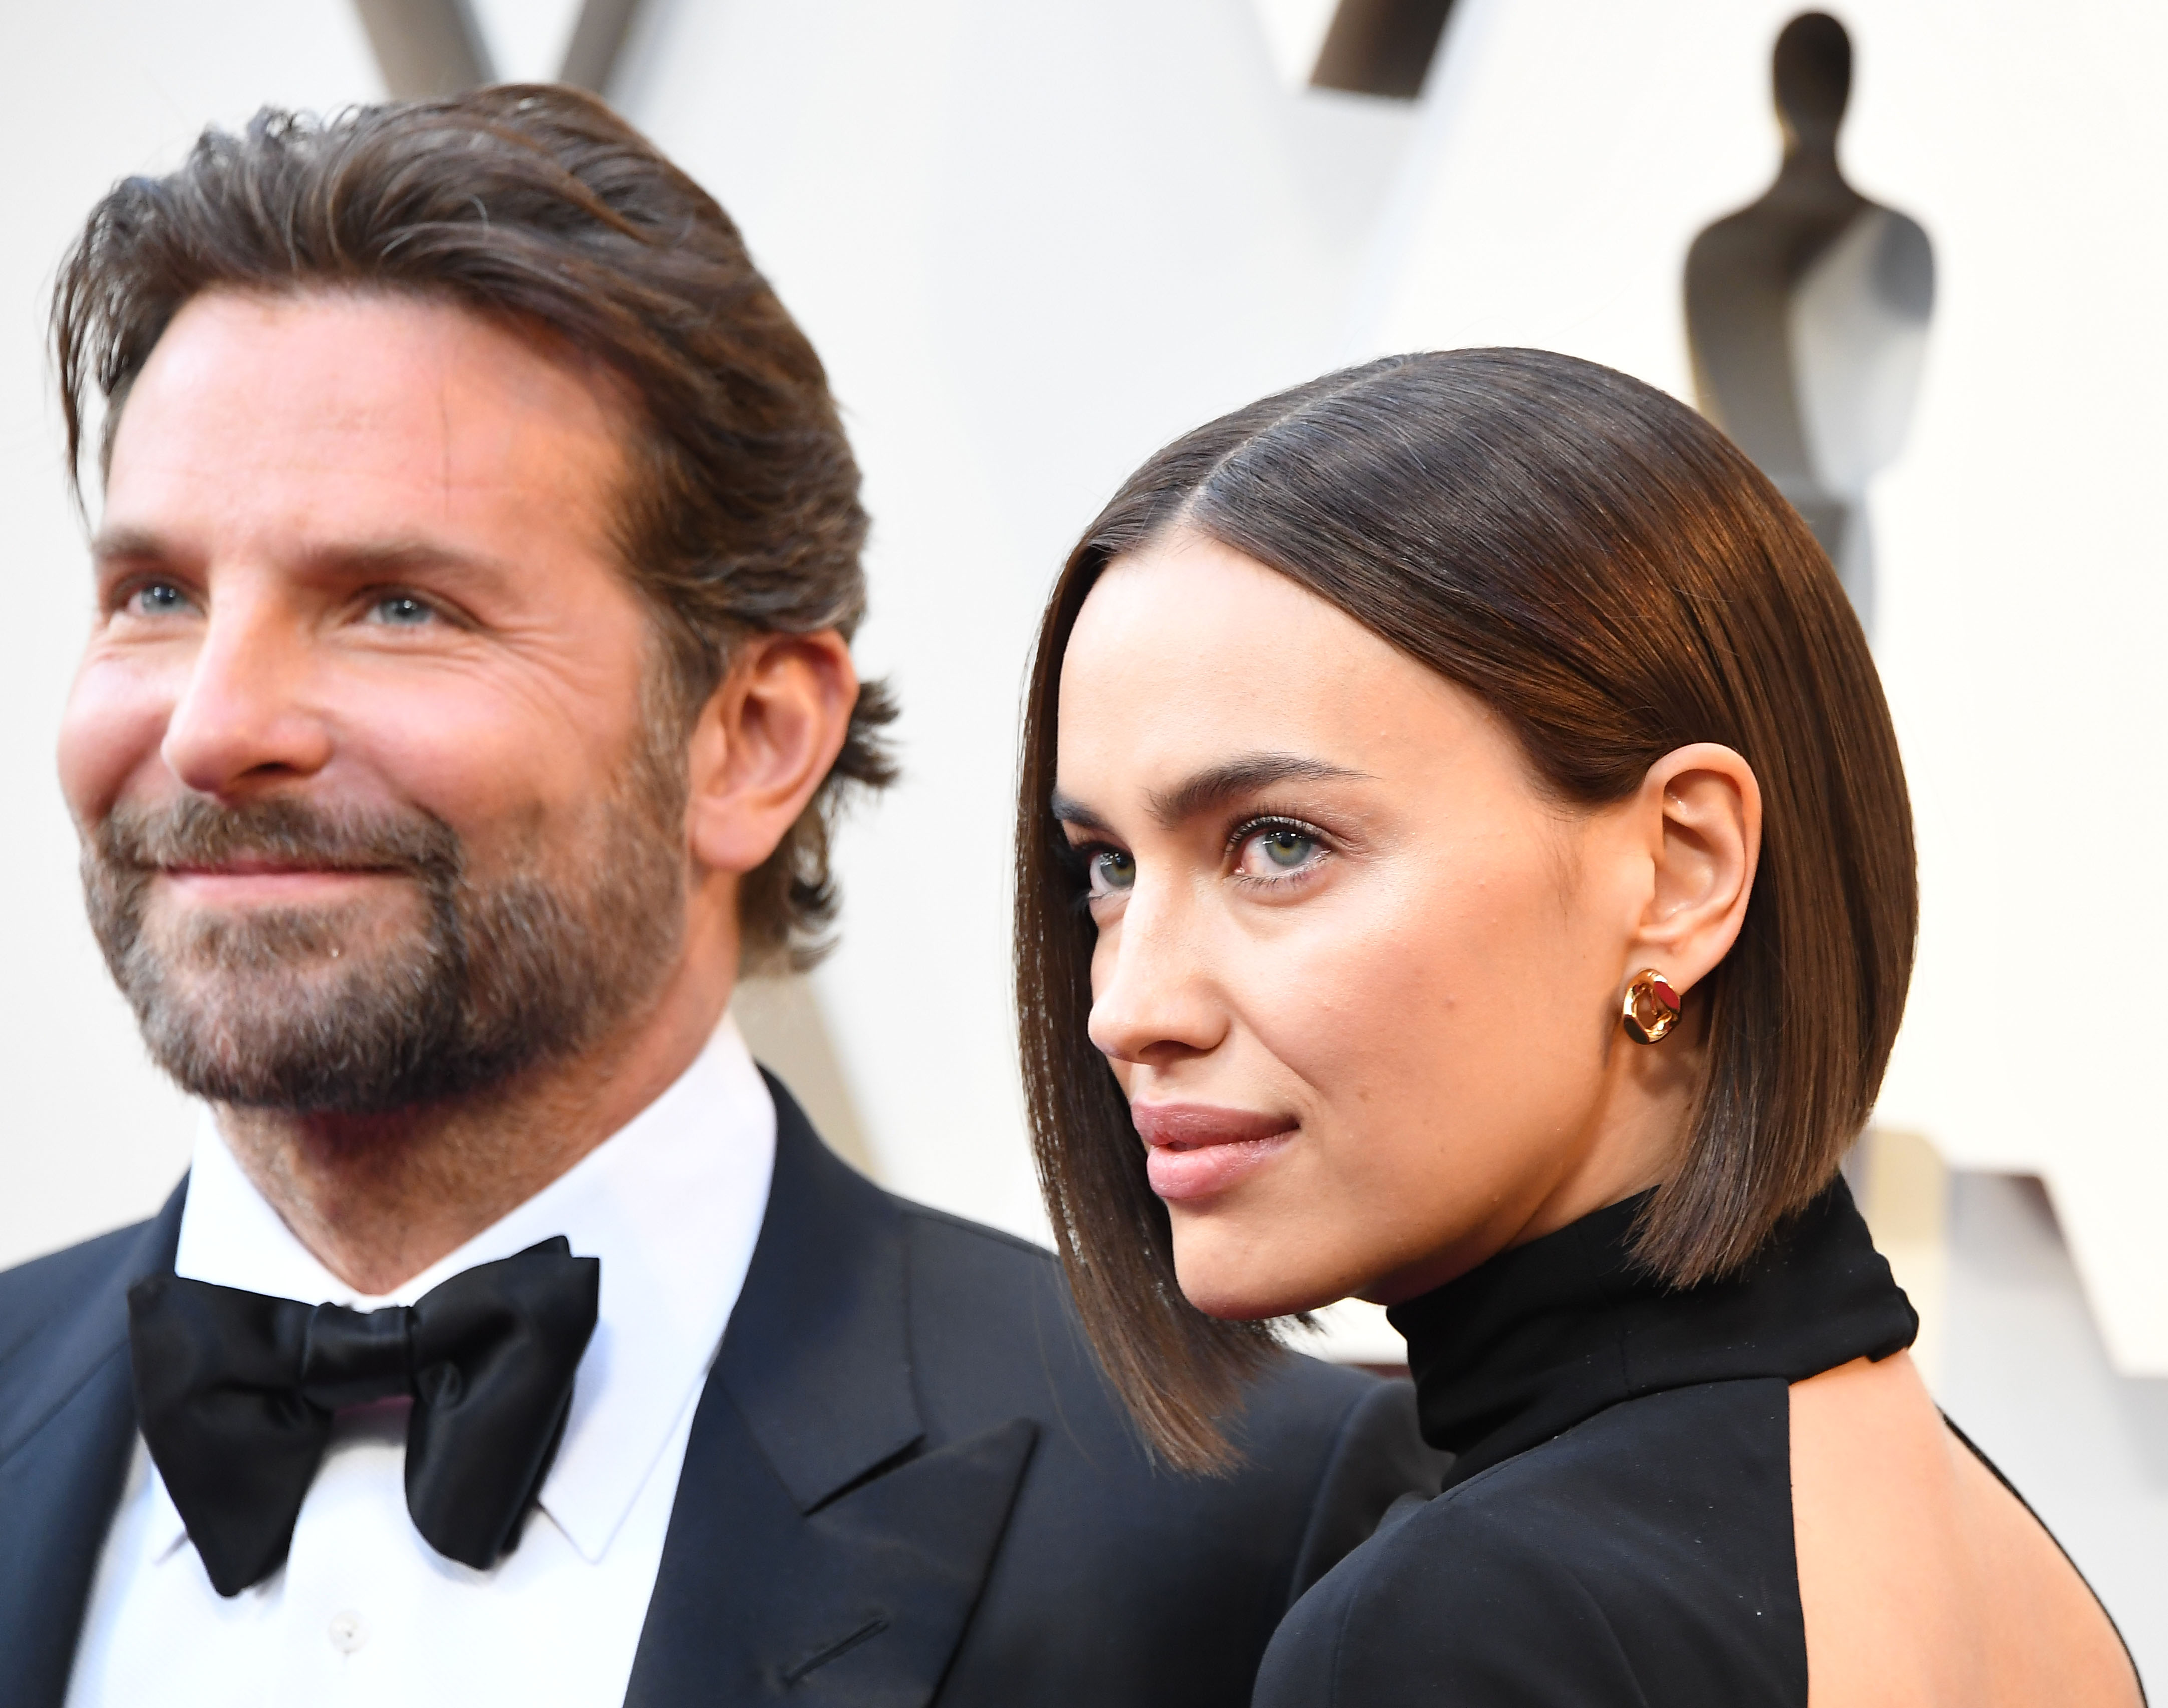 Bradley Cooper and Irina Shayk in Hollywood in 2019 | Source: Getty Images